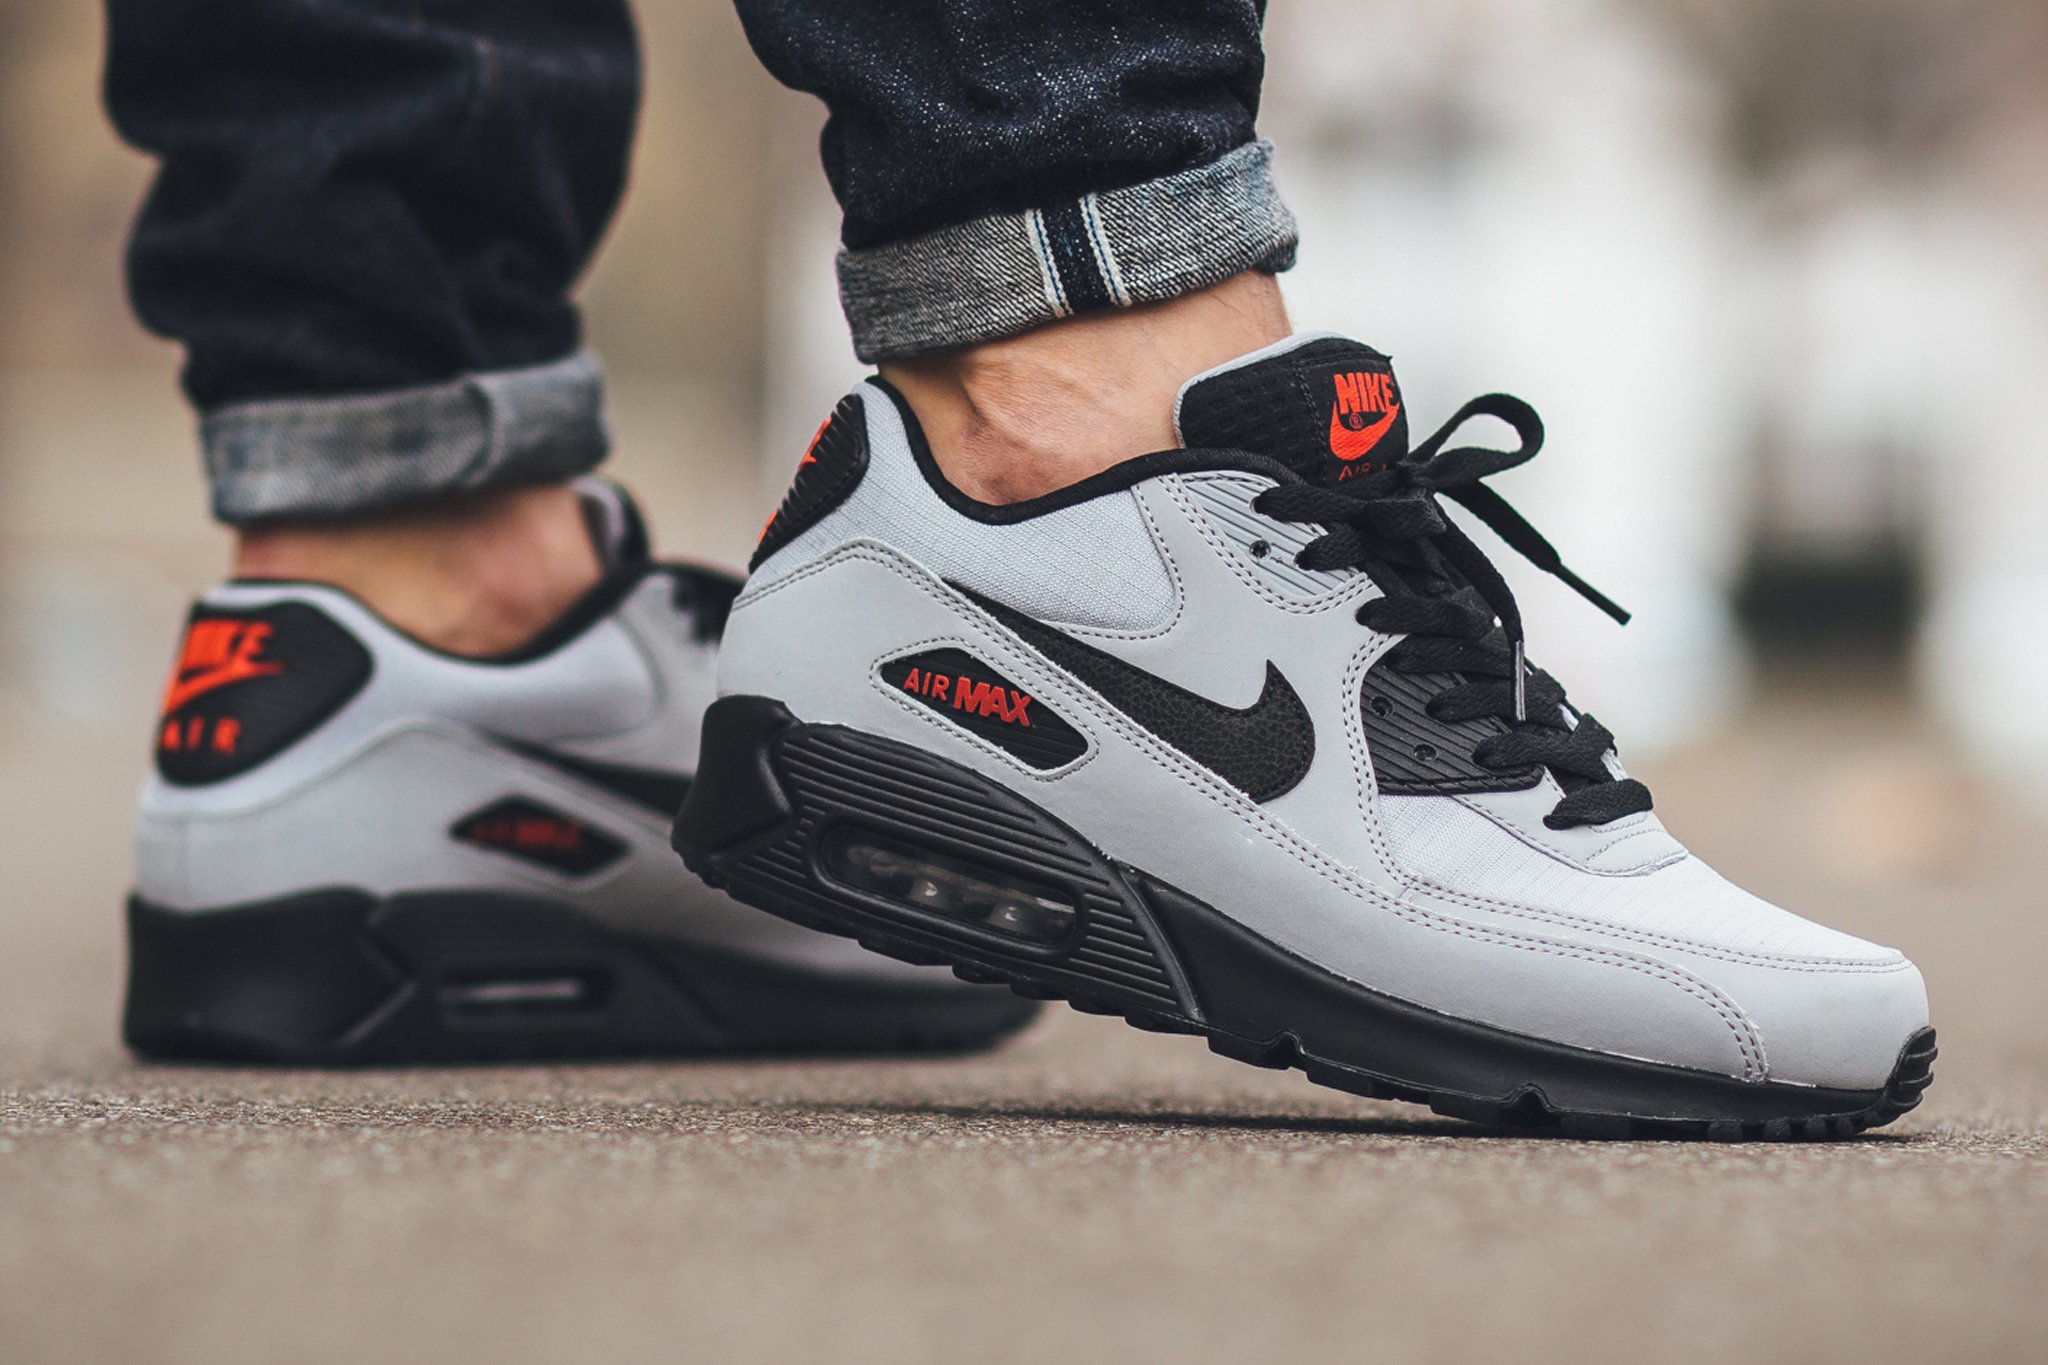 Titolo on Twitter: "Nike Air Max 90 Essential - Wolf Grey/Black-Black-University  Red SHOP HERE: https://t.co/fOJ0OAWj9y https://t.co/yi1d7iFt7N" / Twitter